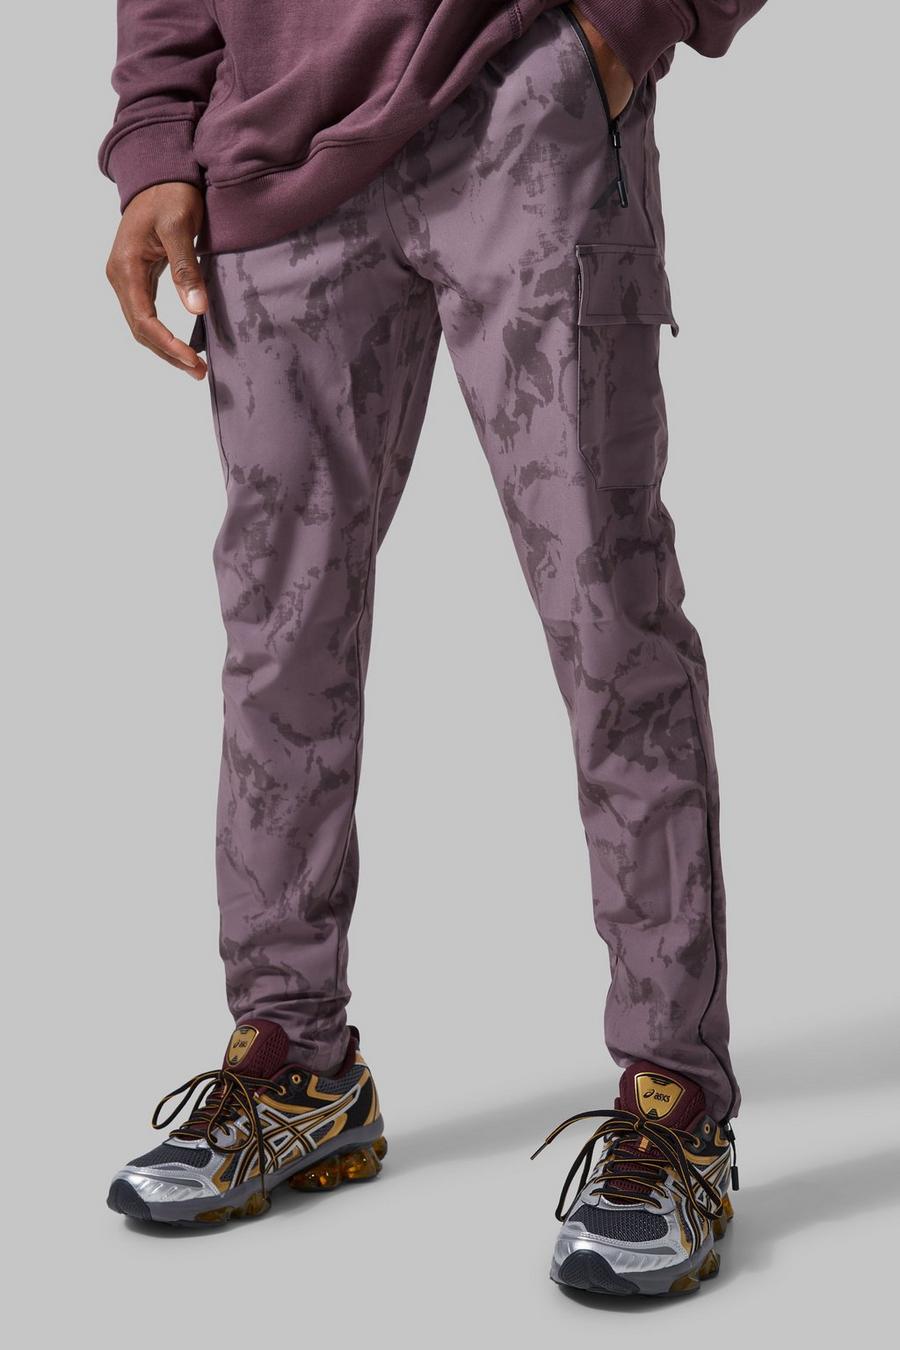 Pantaloni tuta Cargo Active Matte Skinny Fit in lavaggio acido, Dusty red image number 1